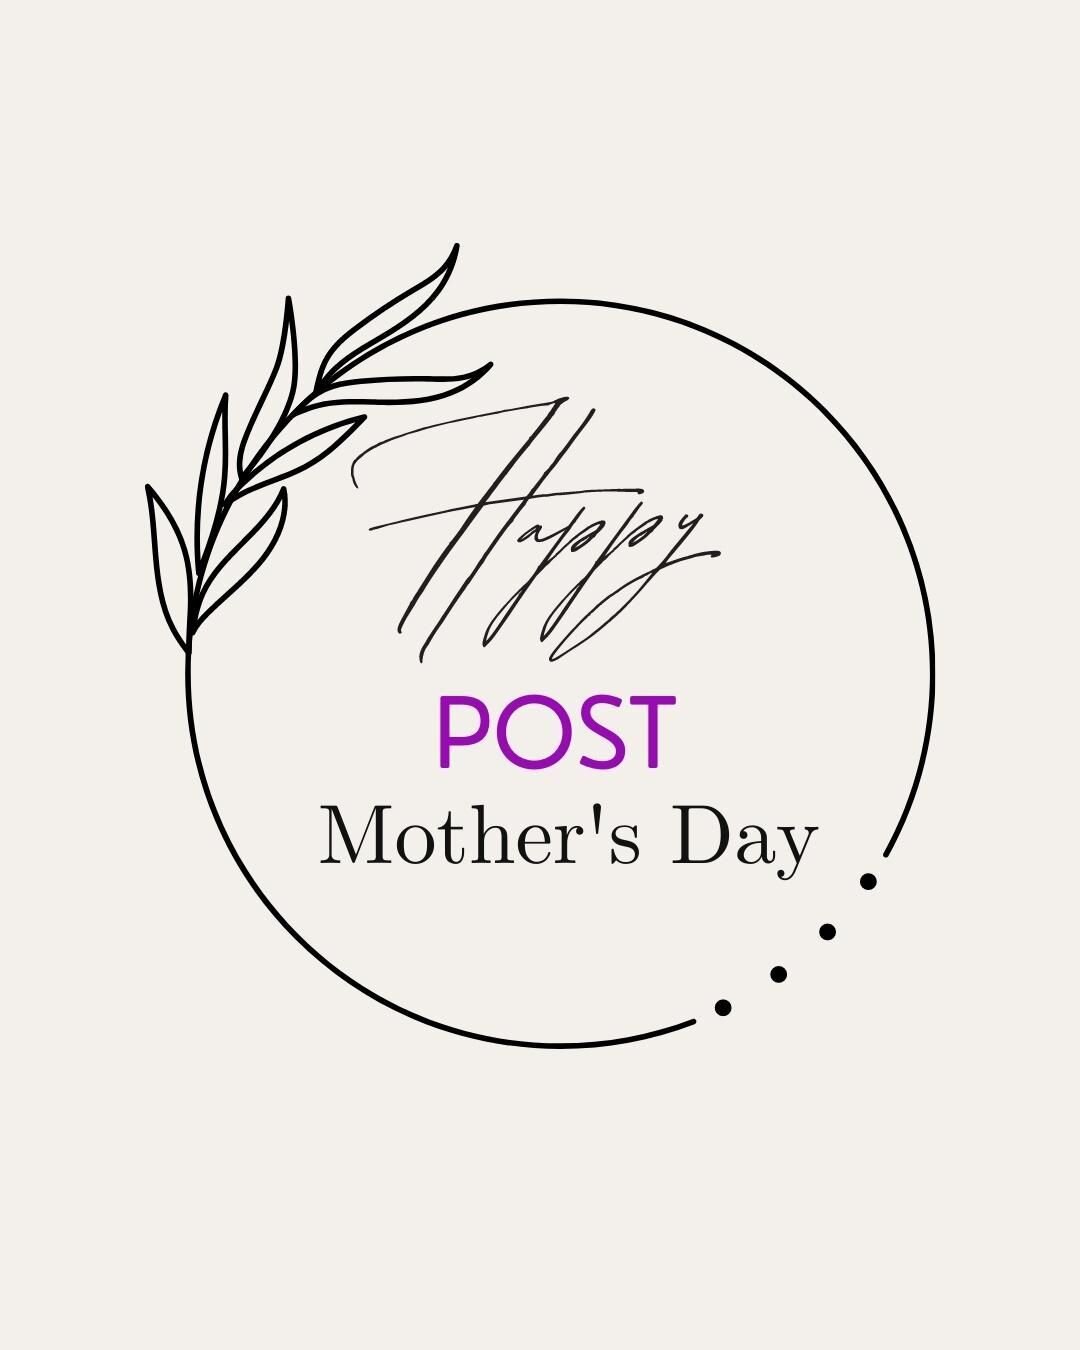 Happy Post Mother's Day! 

You know, the days after Mother's Day when you return to your regular mothering duties. When all the well wishes, flowers, dinners, cleaning, and perfect behavior (if you're lucky) go away, we understand and believe every d